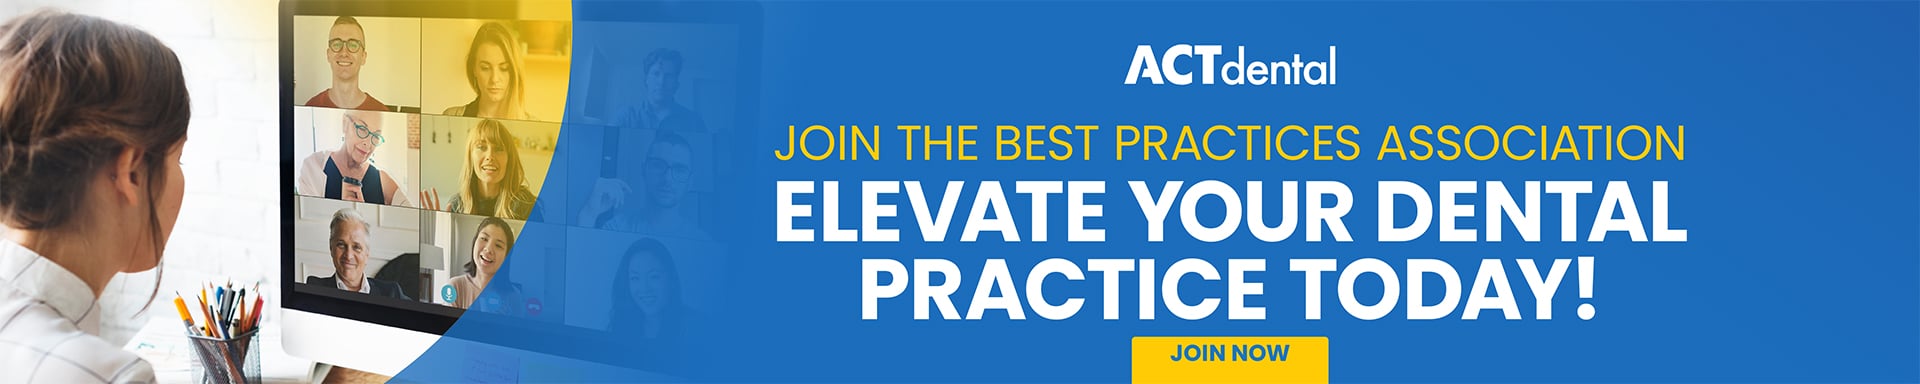 121-Elevate-Your-Dental-Practice-with-the-Best-Practices-Association-banner